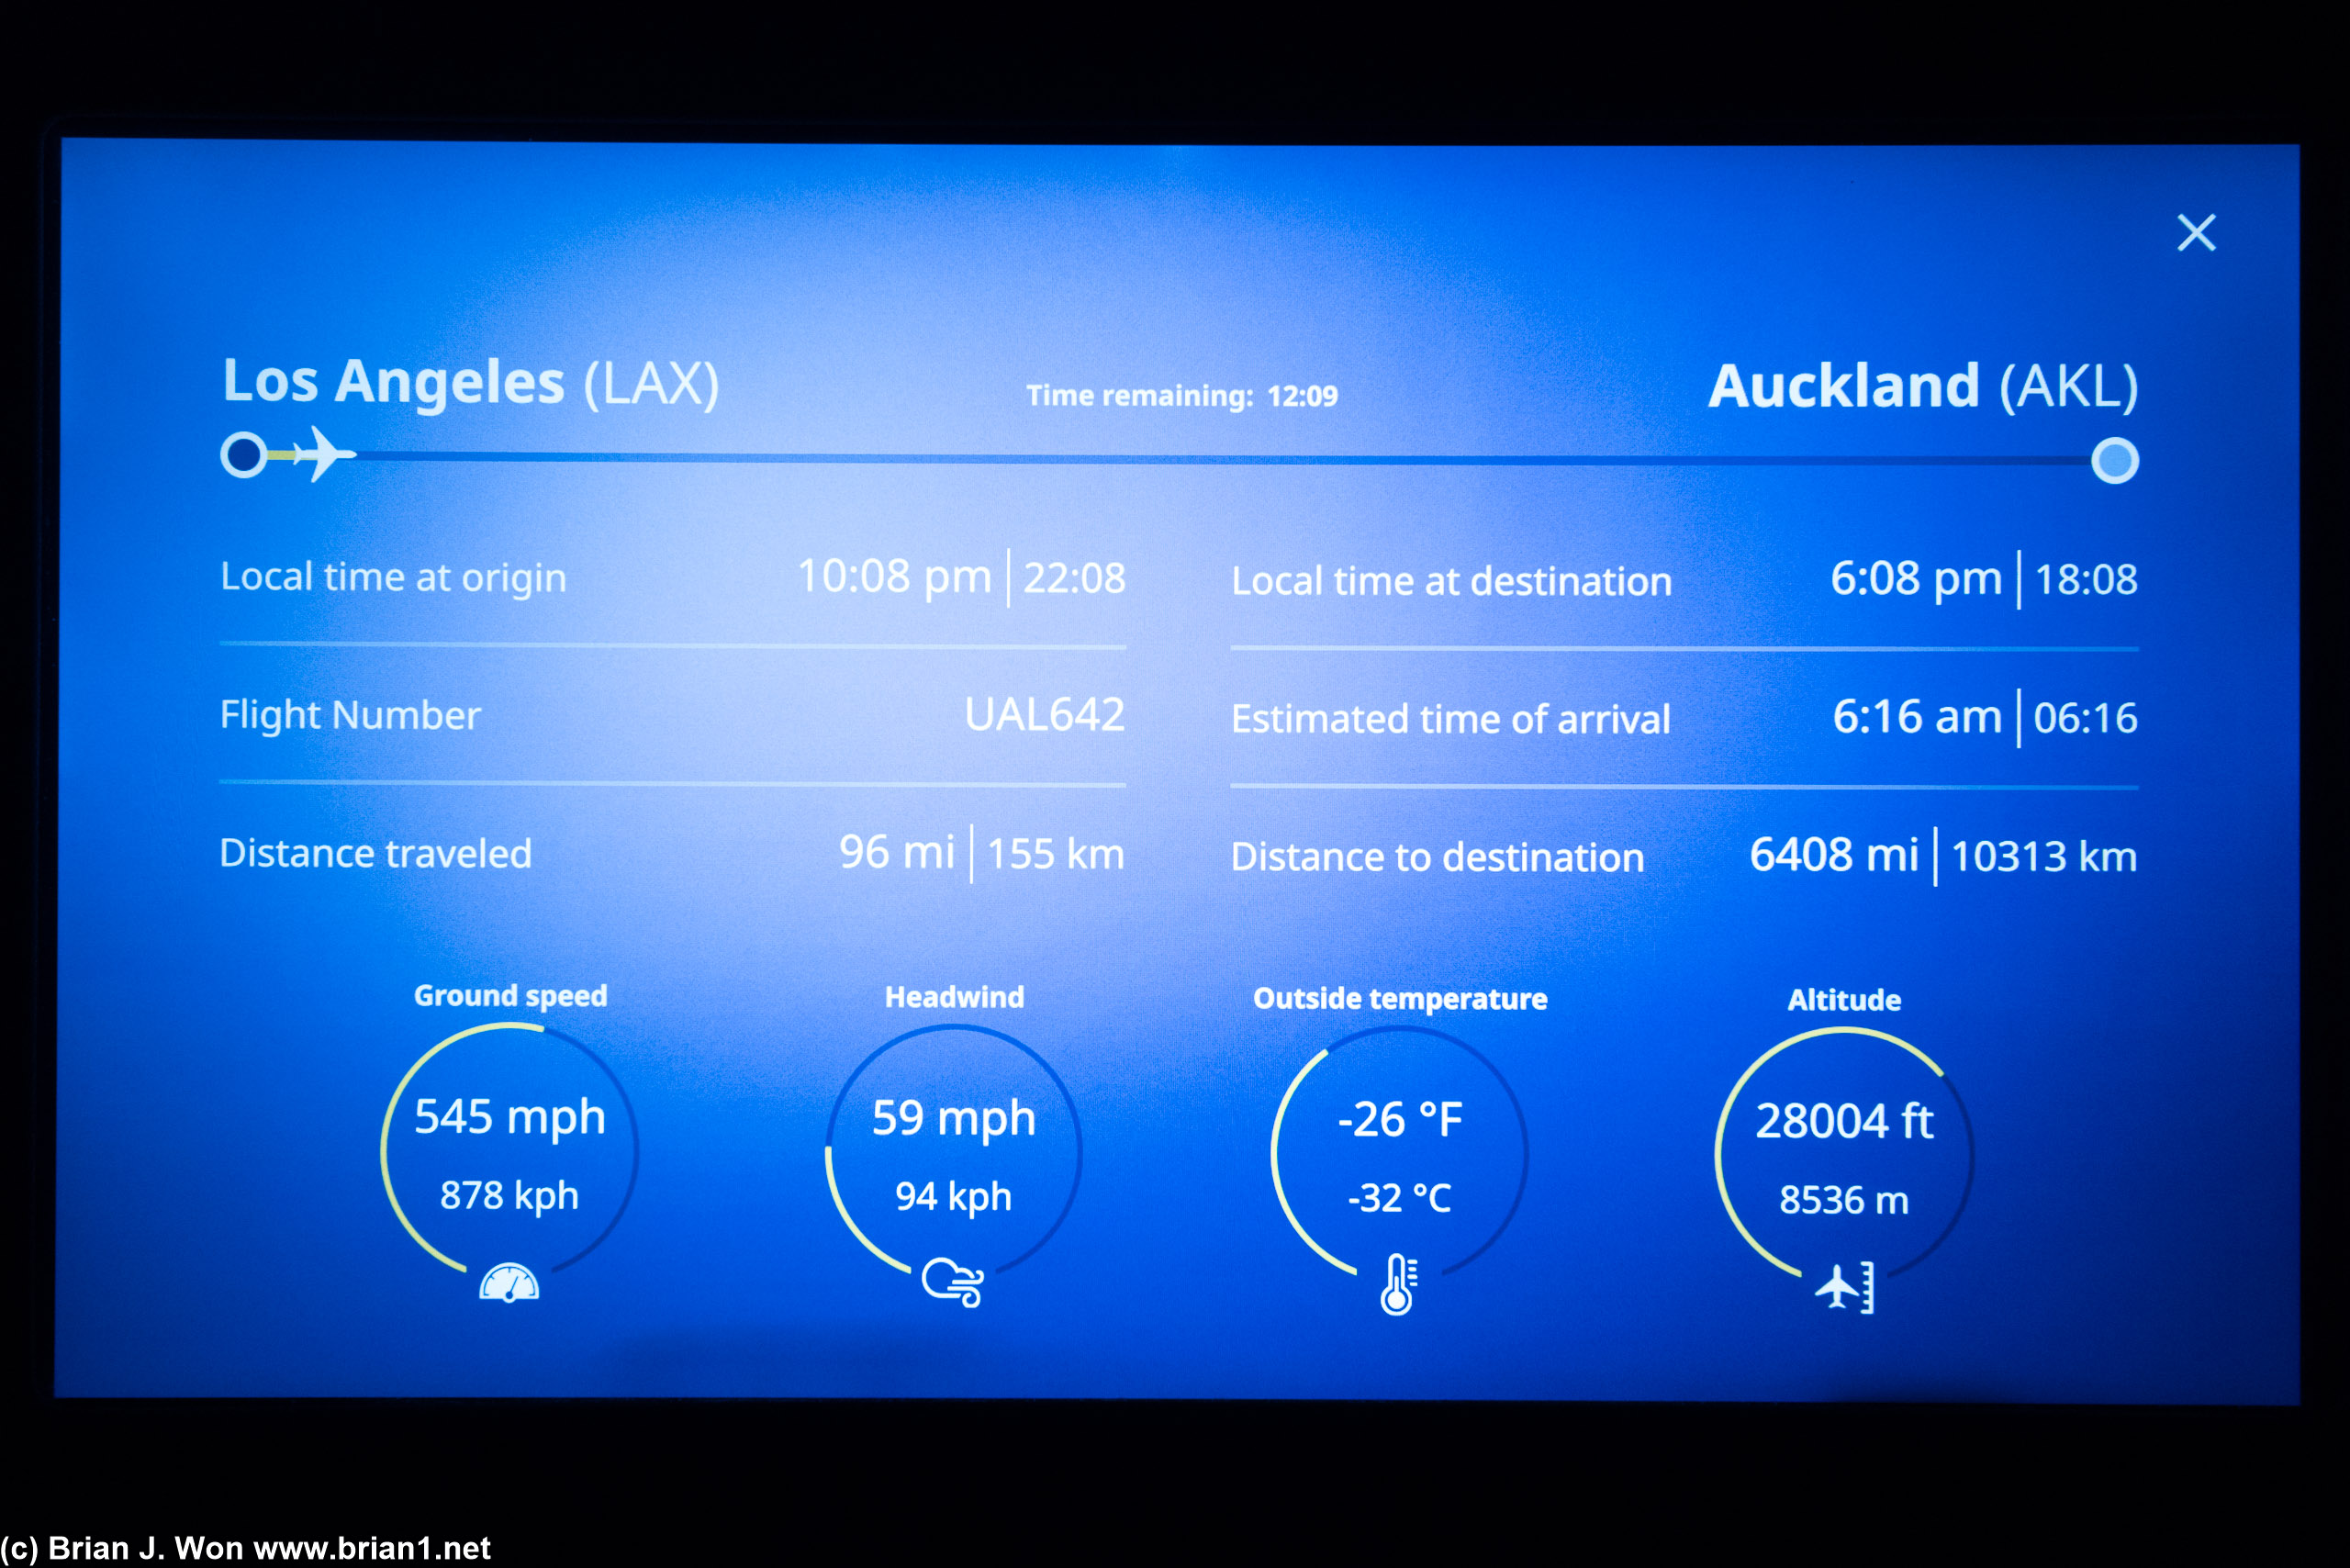 United's inaugural flight from LAX to Auckland, UA 642, is now in the air.